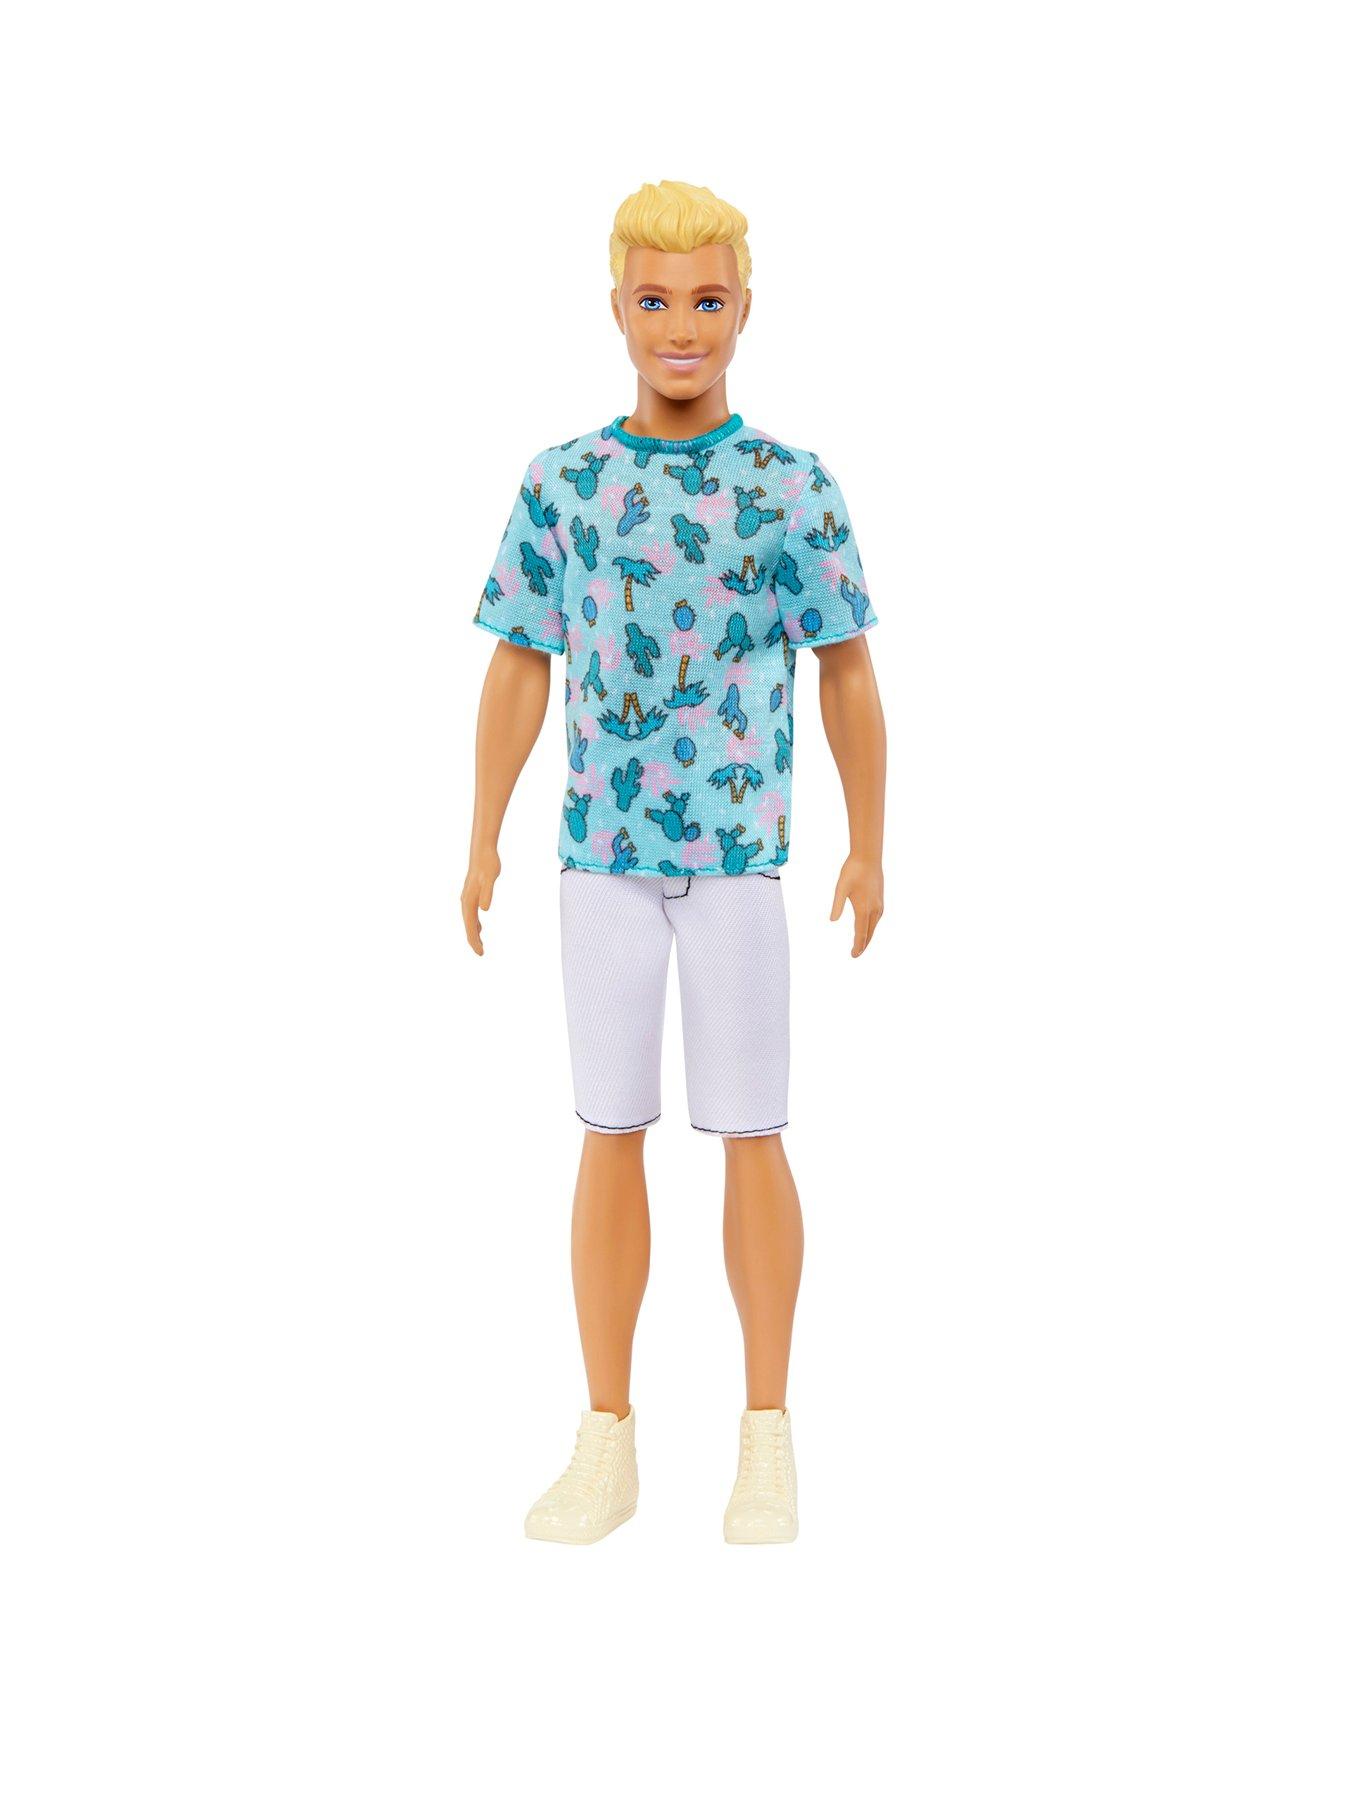 Barbie Ken Fashionista Doll - #211 with Blonde Hair and Cactus Tee ...